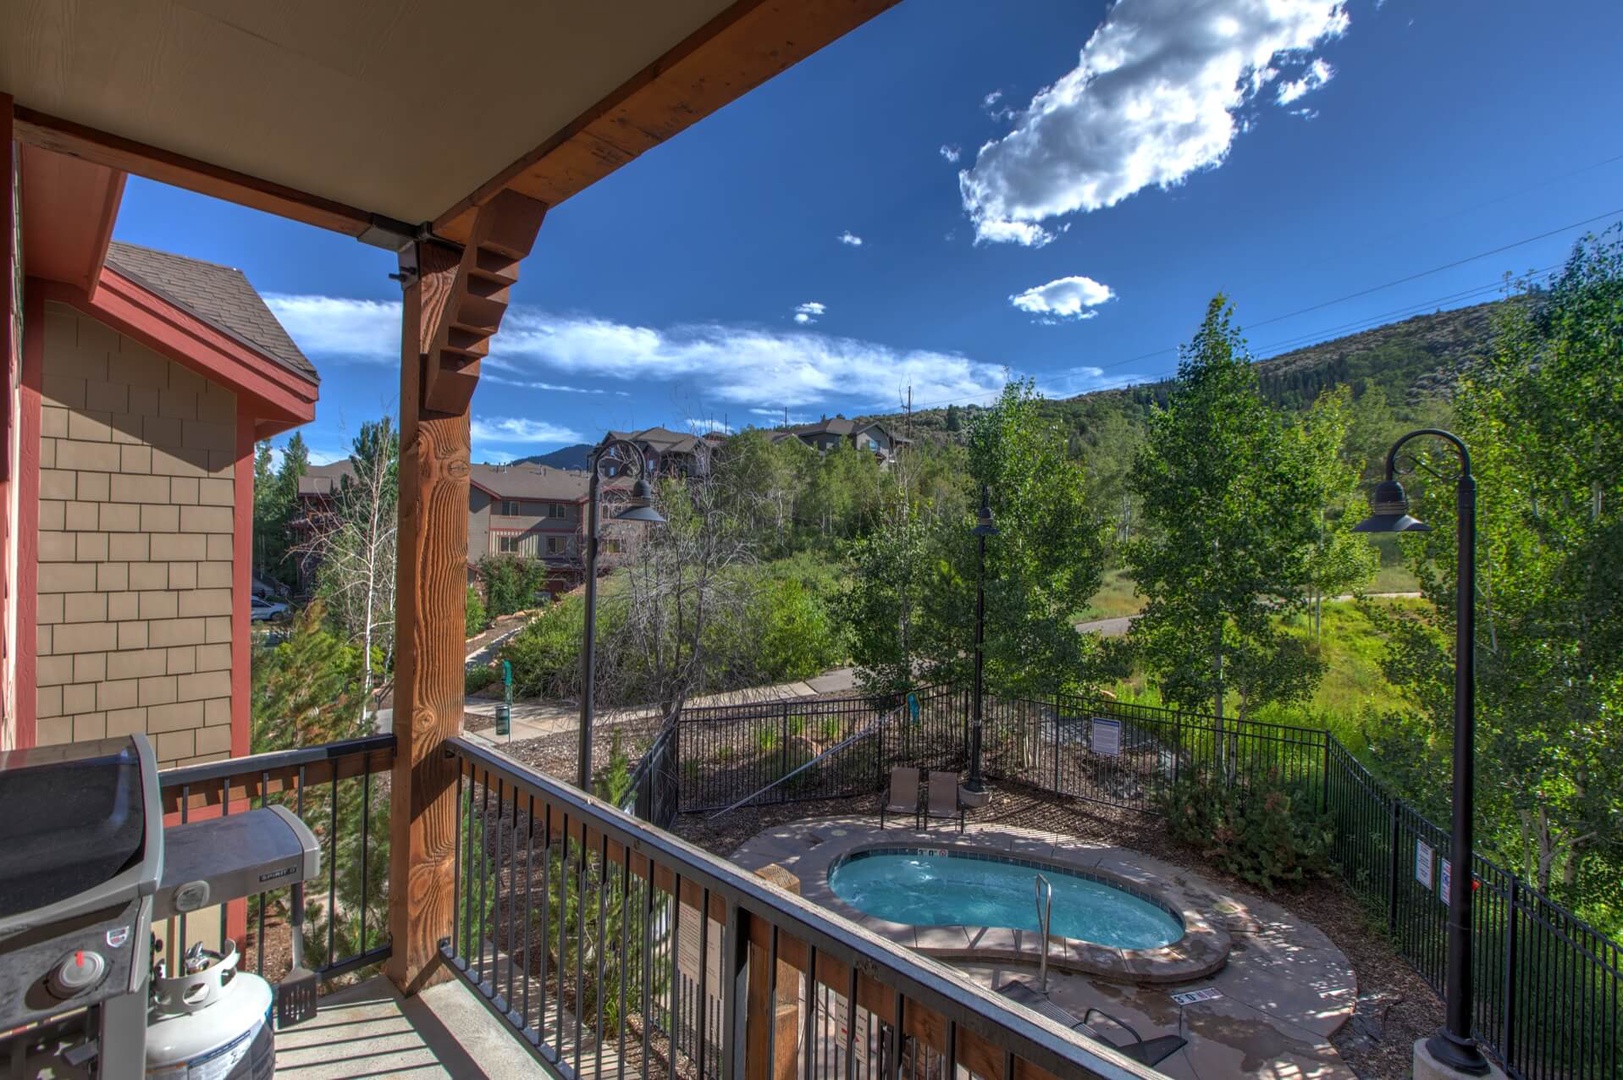 Bear Hollow Lodges 1304: The views from the balcony are incredible and a perfect location for the community hot tub after a day of mountain adventures.